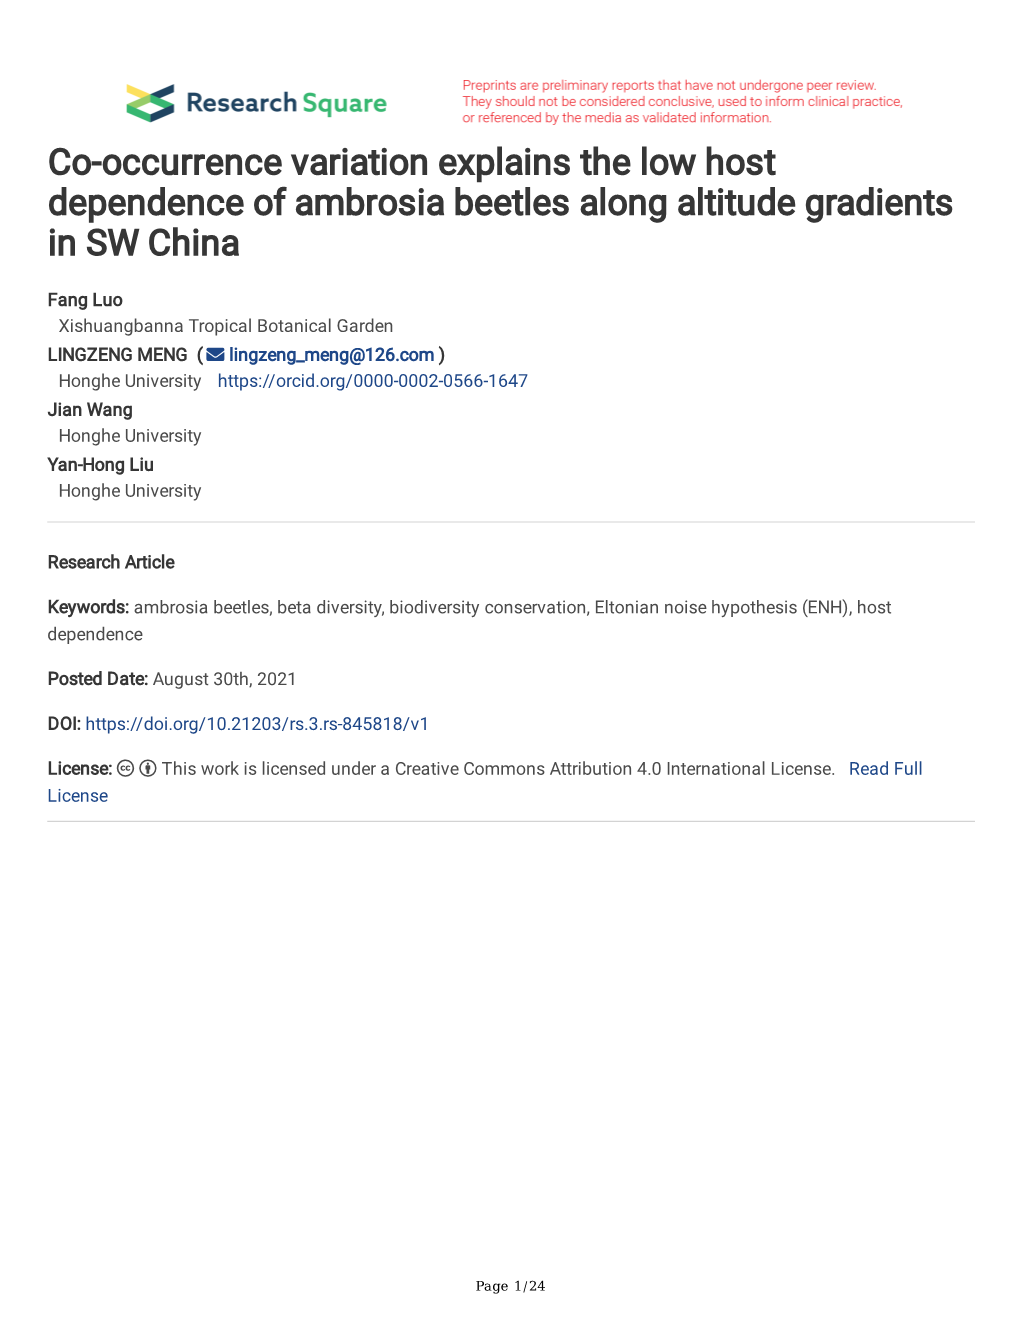 Co-Occurrence Variation Explains the Low Host Dependence of Ambrosia Beetles Along Altitude Gradients in SW China